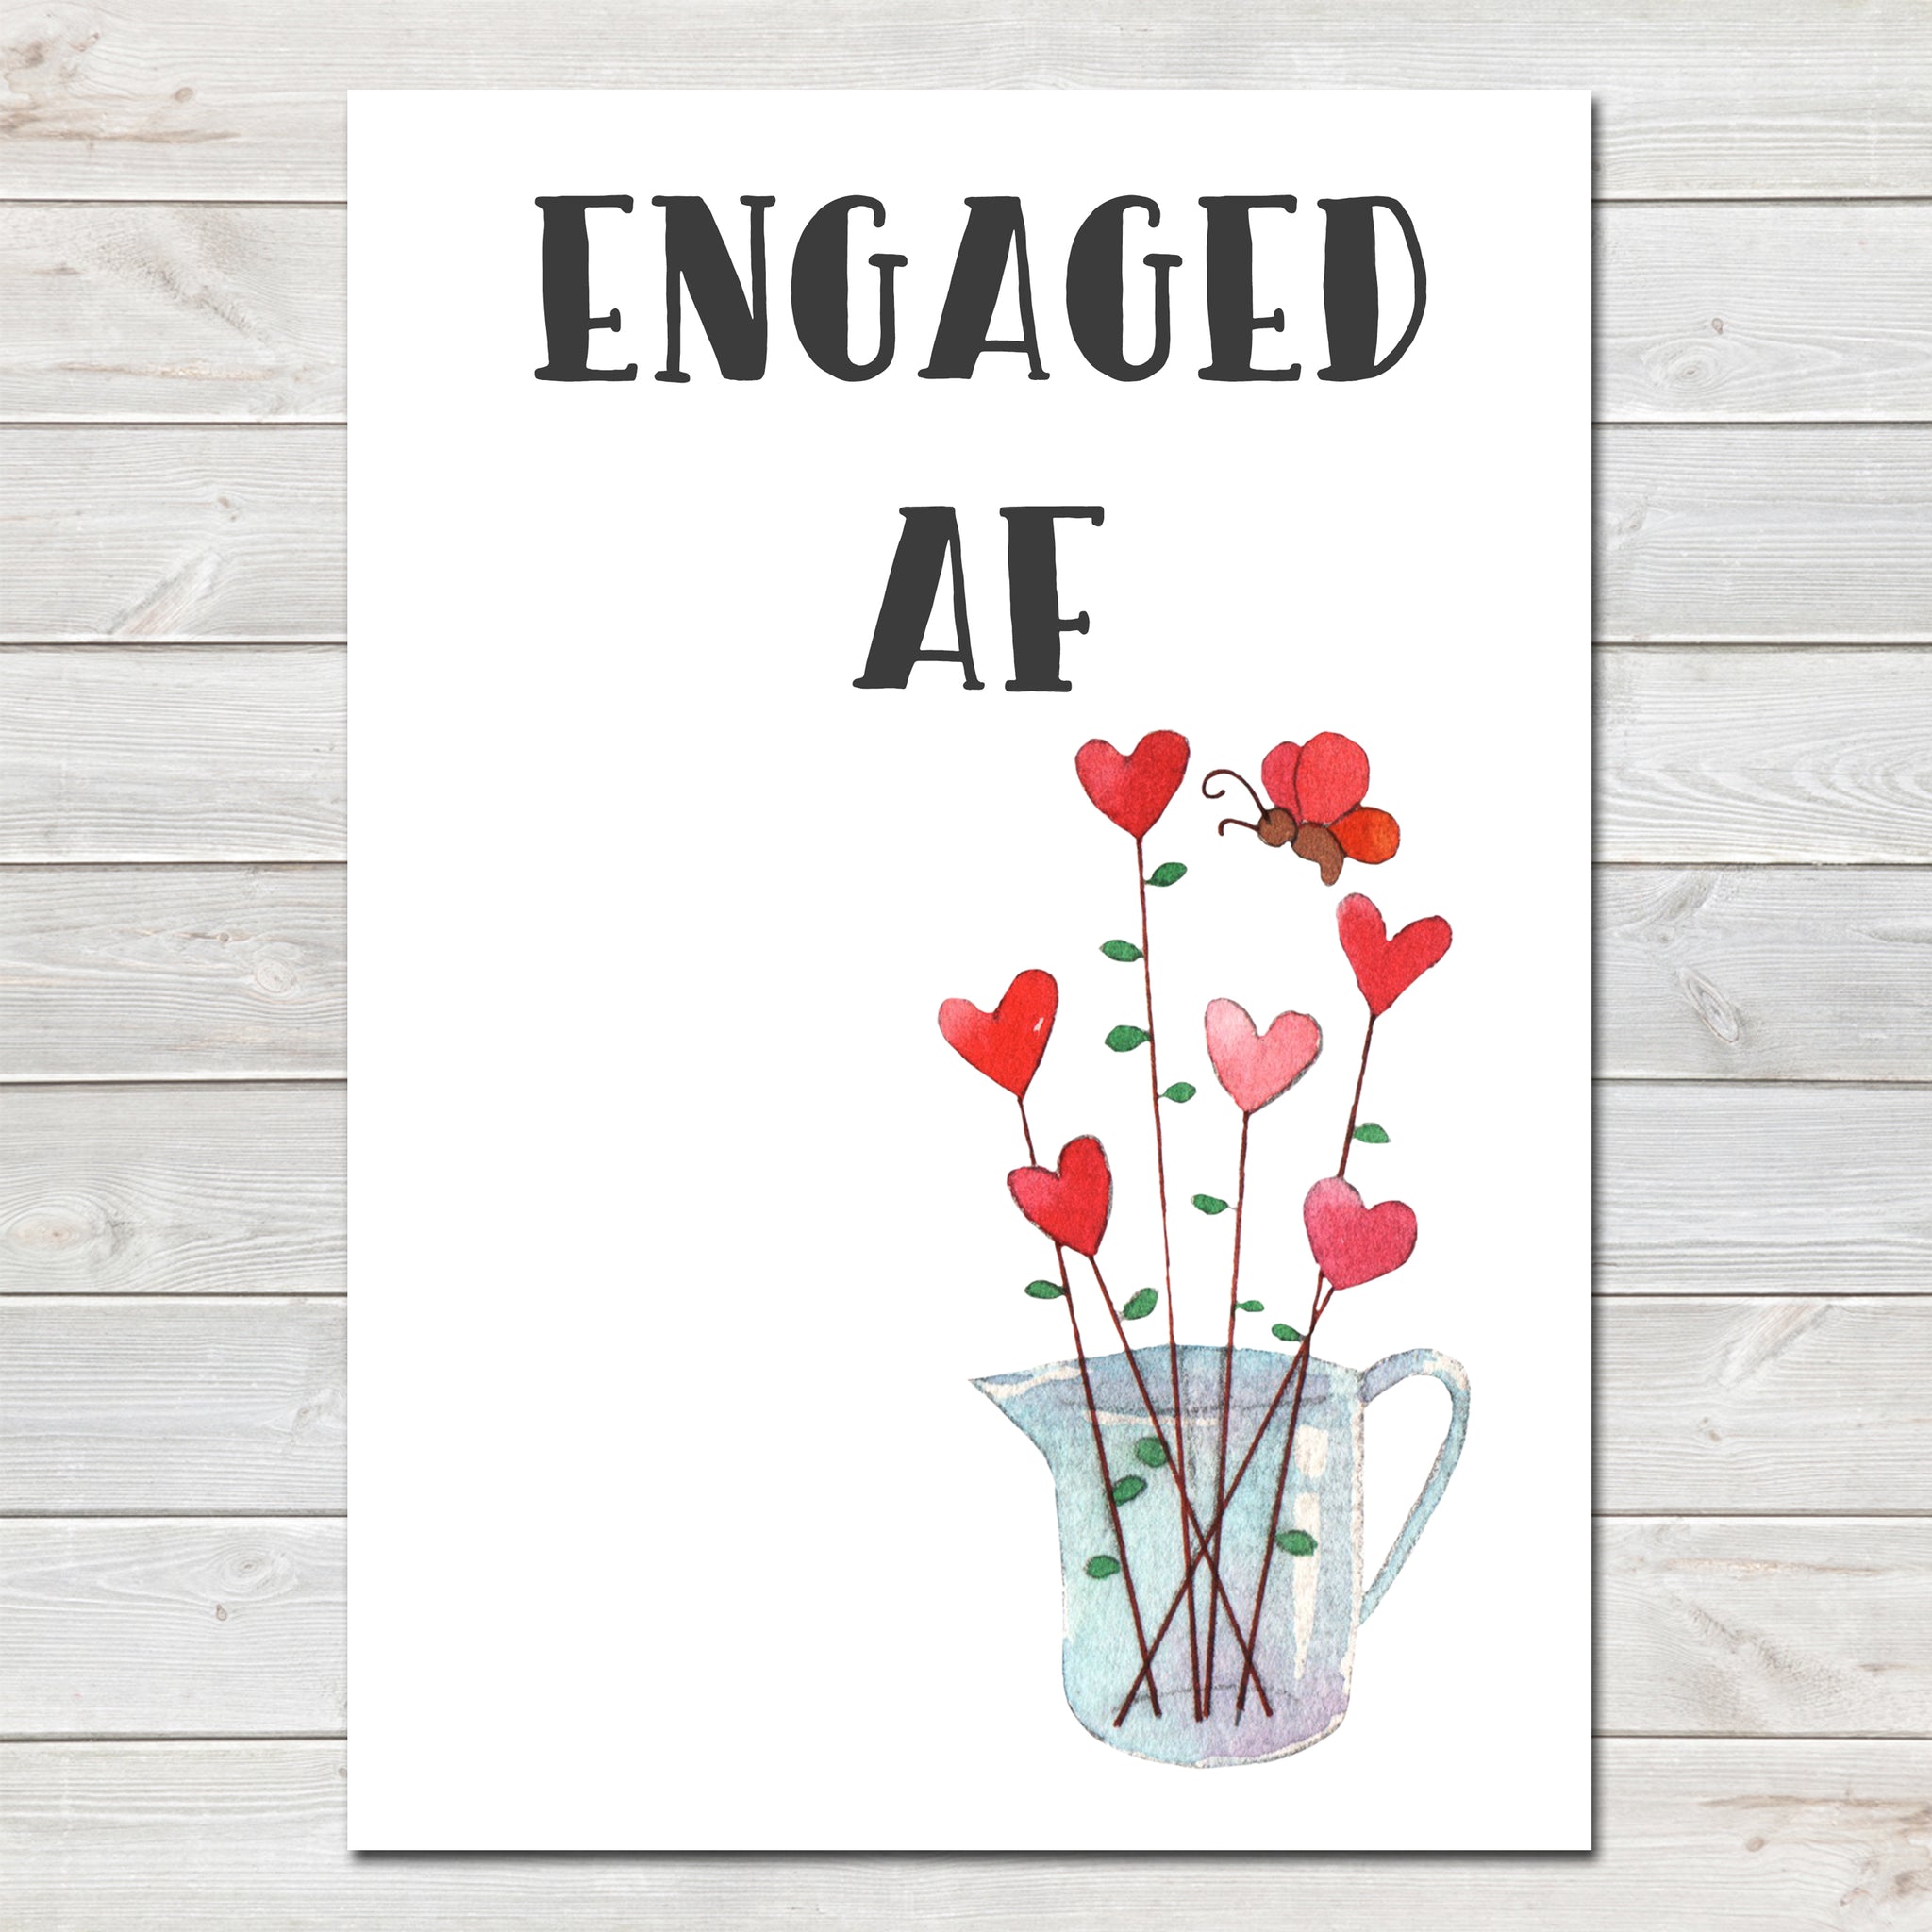 Engagement Party Engaged AF (As F***) Hearts Flowers Poster / Photo Prop / Sign